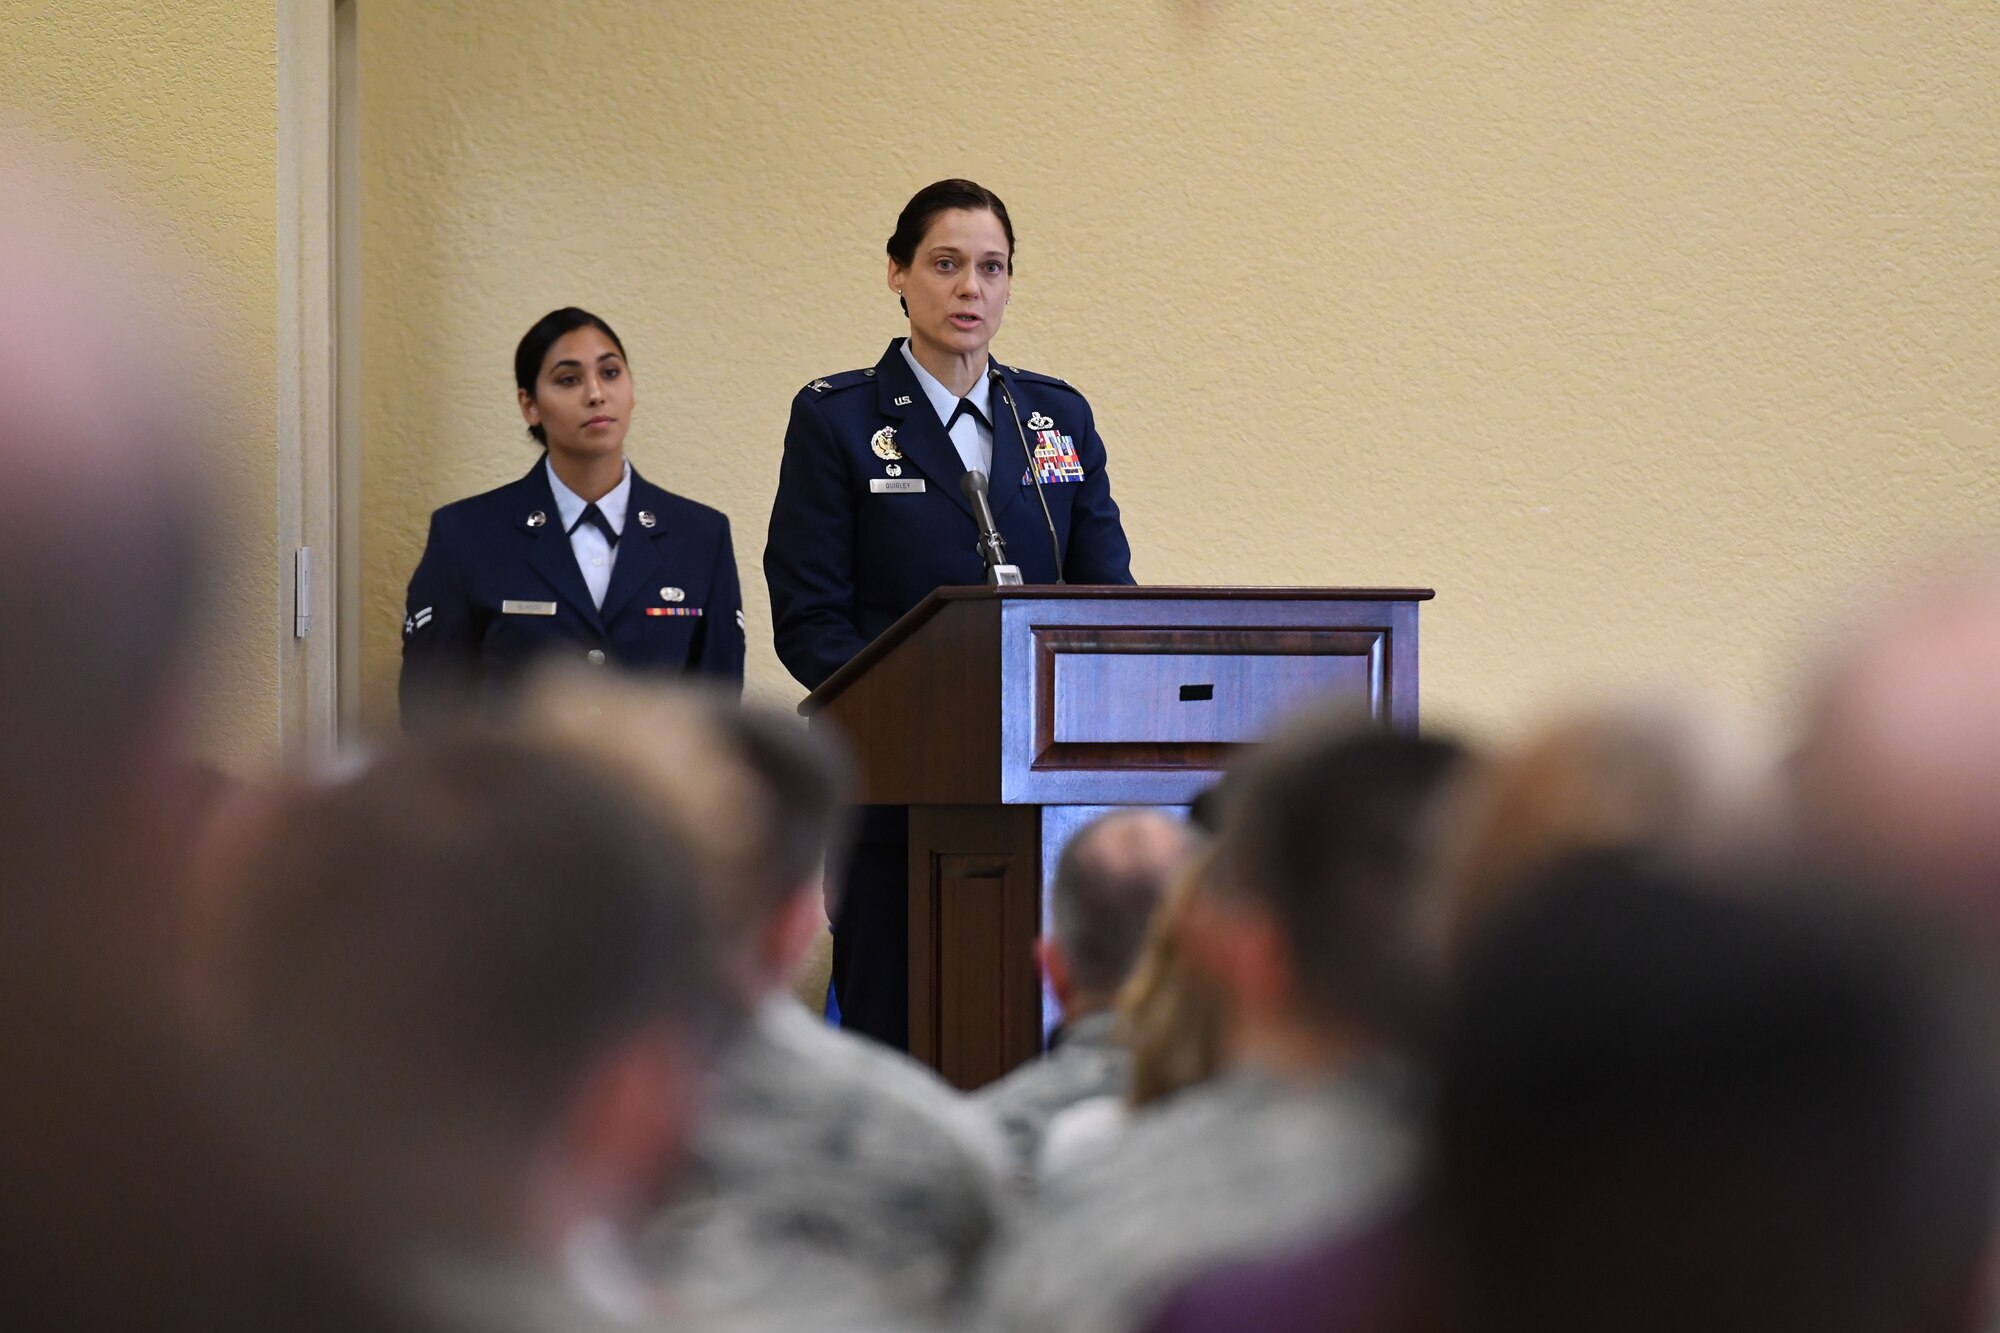 U.S. Air Force Col. Marcia Quigley, 81st Mission Support Group commander, delivers remarks during the 81st MSG change of command ceremony in the Bay Breeze Event Center at Keesler Air Force Base, Mississippi, July 19, 2018. Quigley assumed command from Col. Danny Davis, outgoing 81st MSG commander. (U.S. Air Force photo by Kemberly Groue)